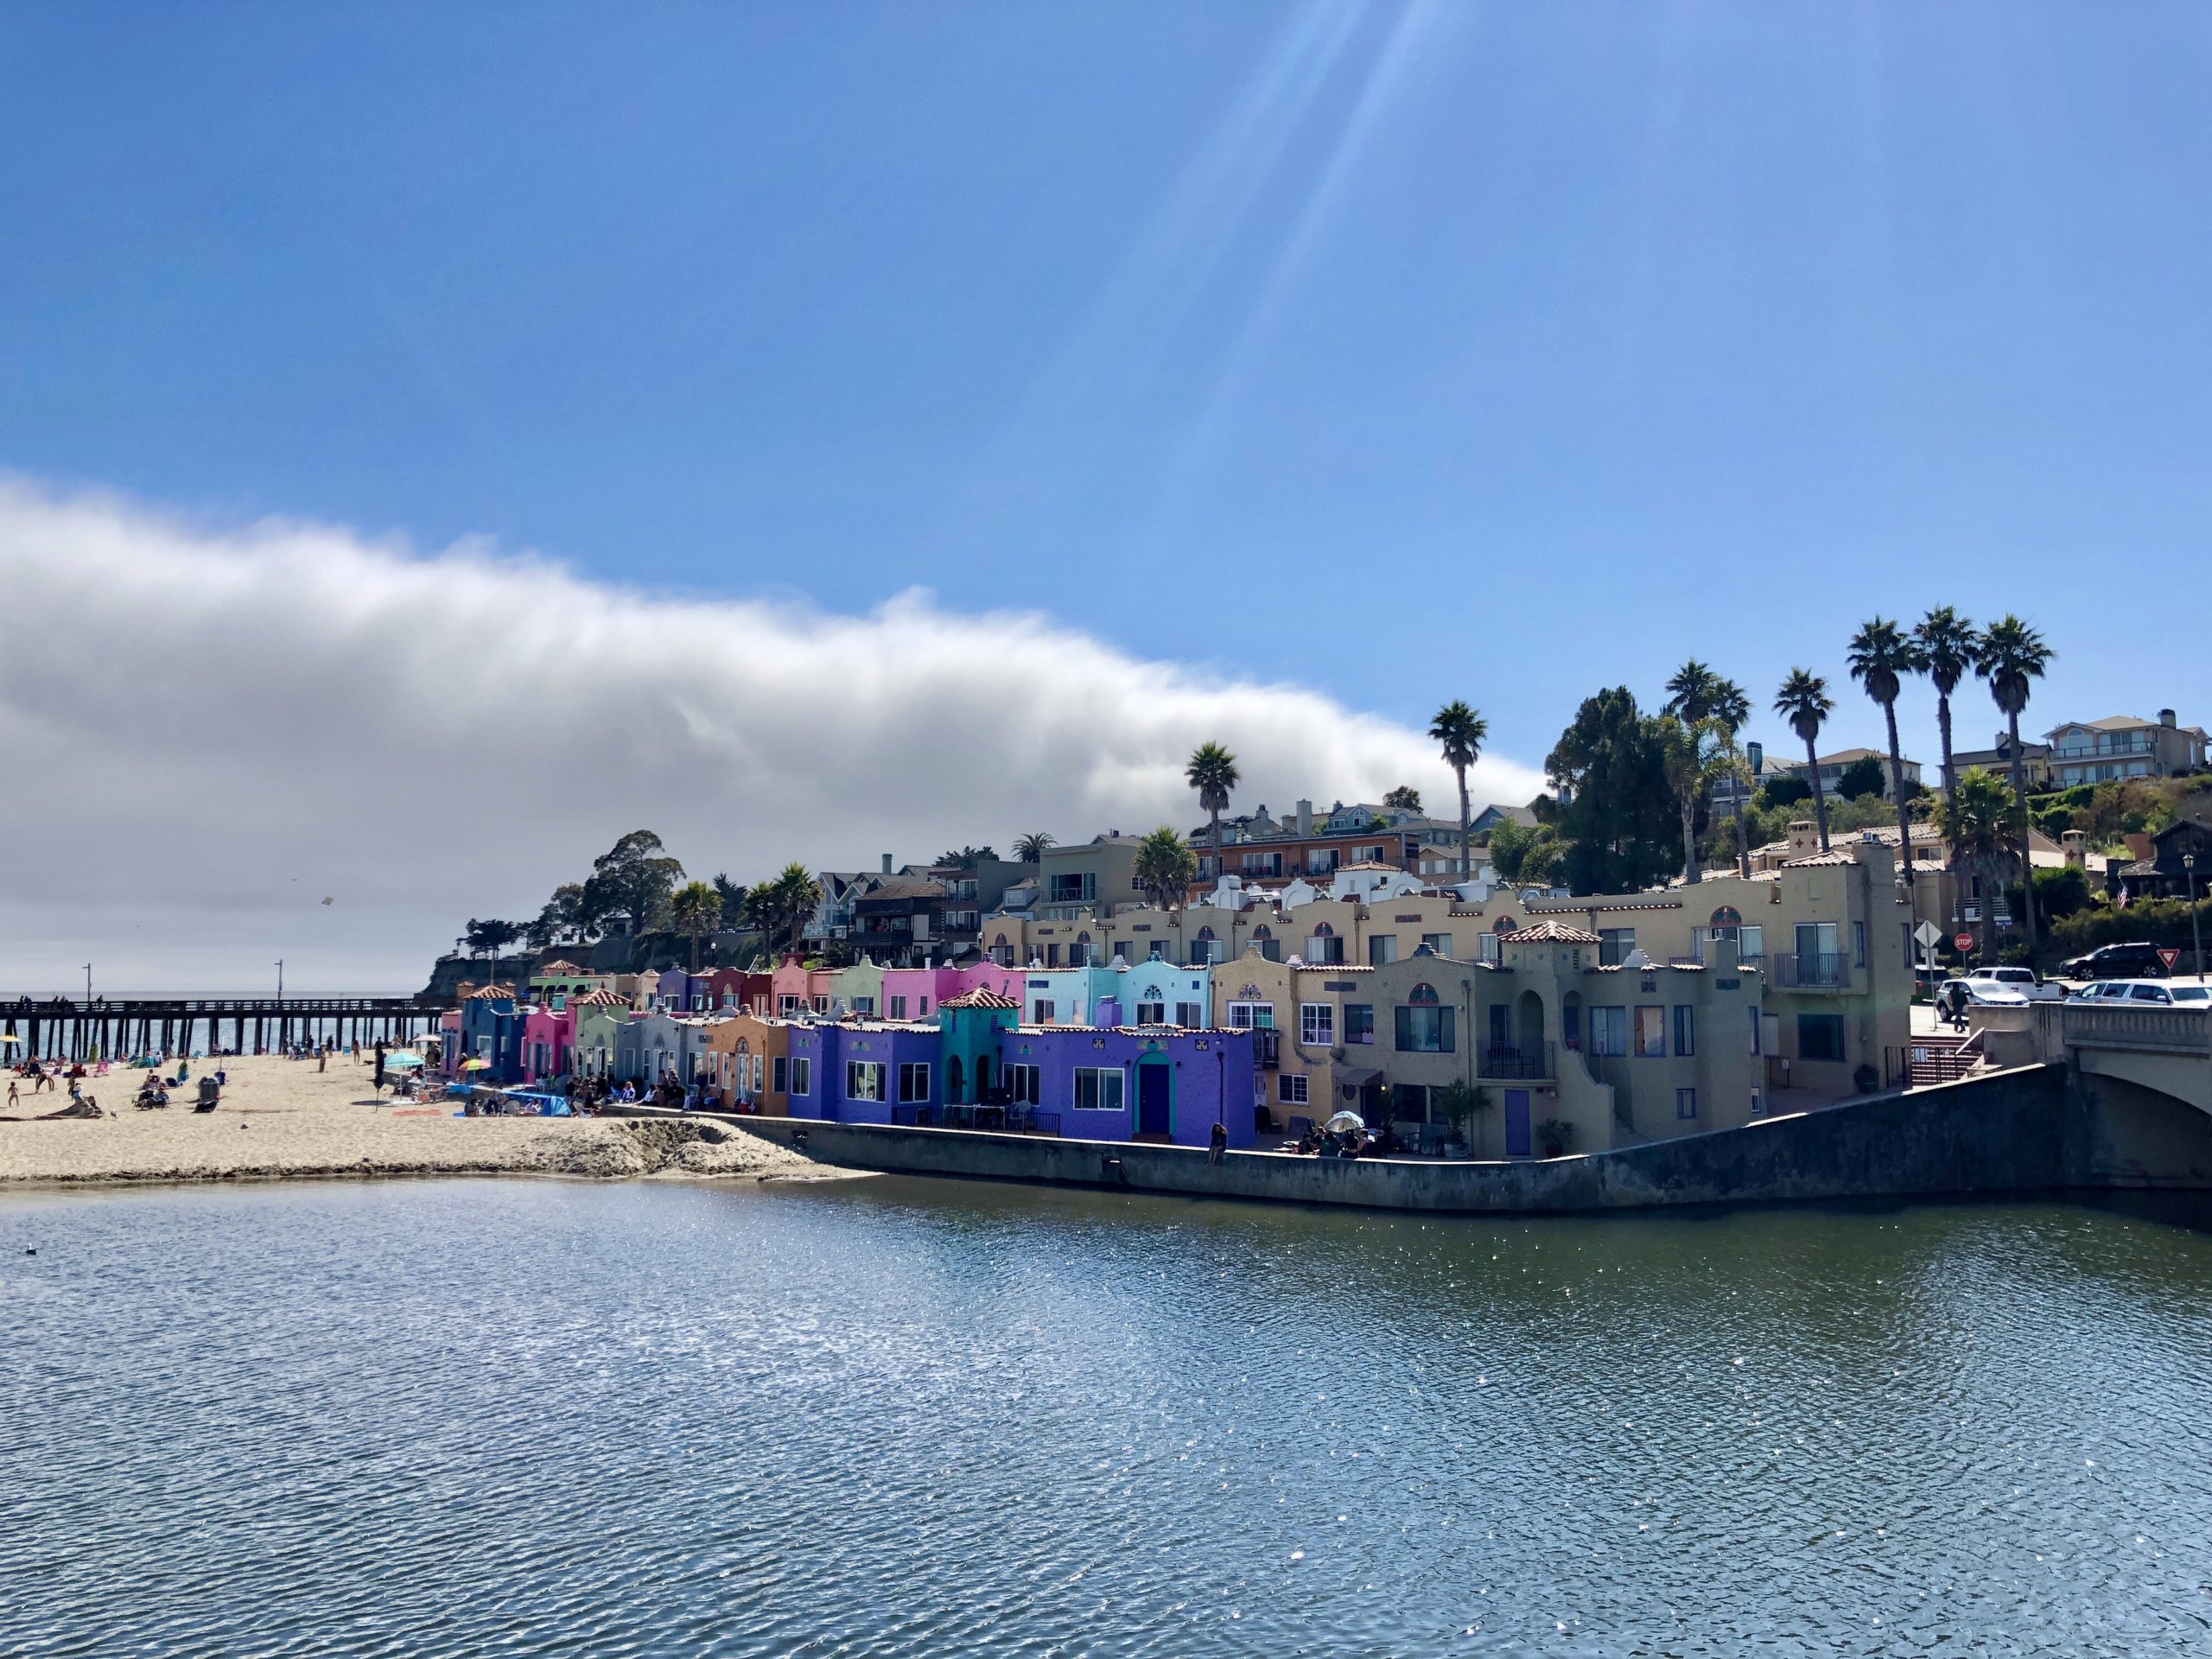 The seaside village of Capitola